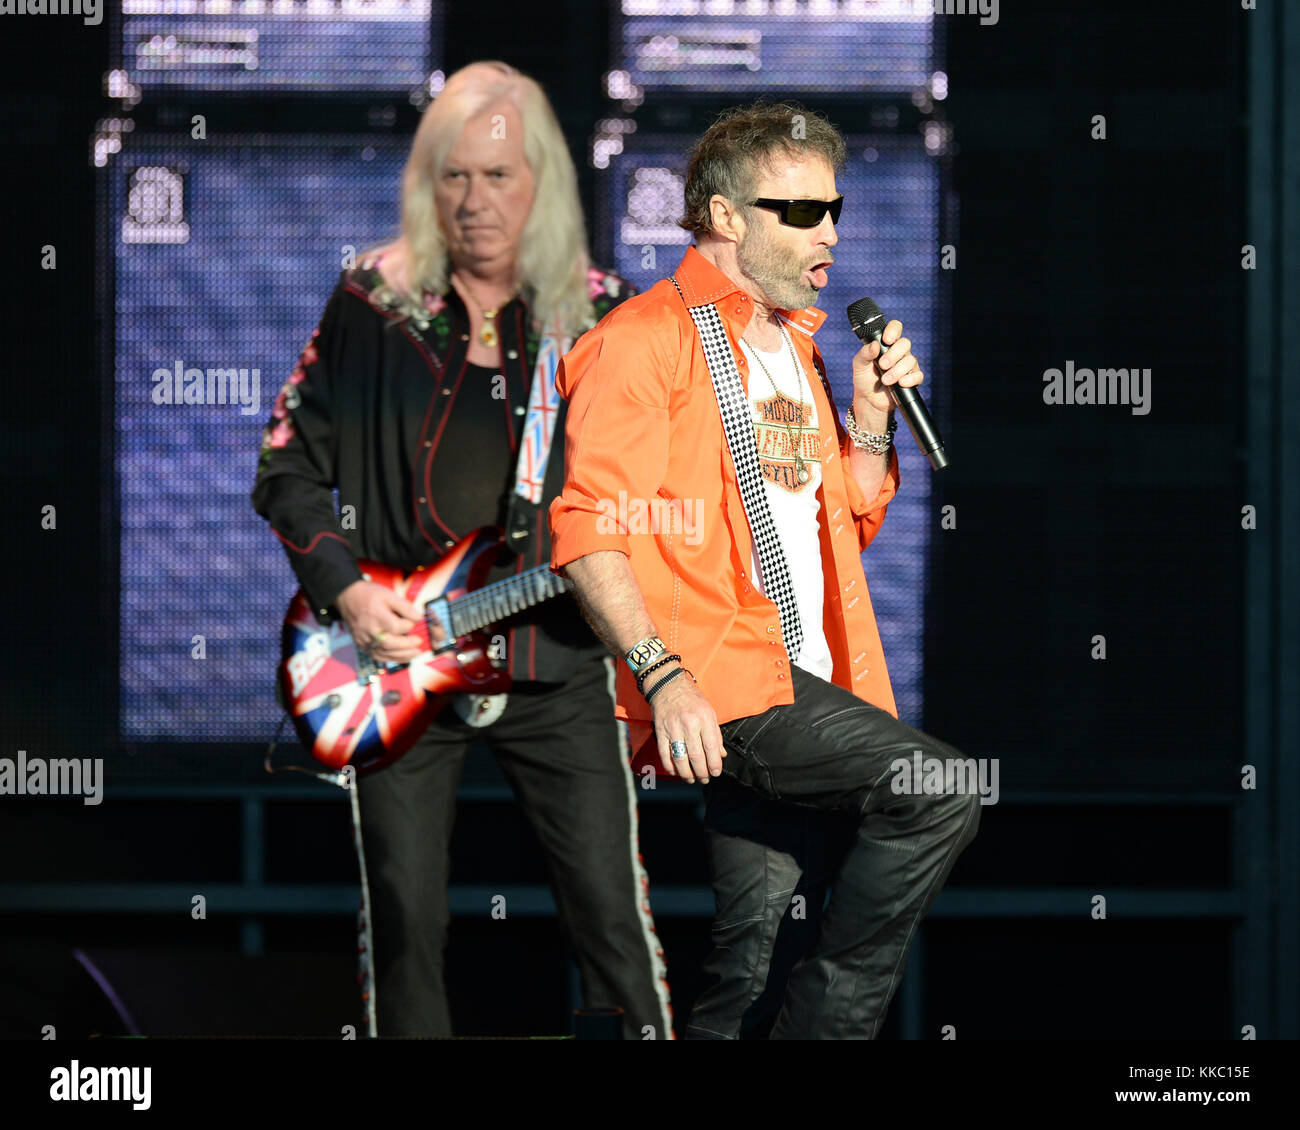 WEST PALM BEACH, FL - MAY 29: Paul Rodgers, Howard Leese of Bad Company performs at The Perfect Vodka Amphitheater on May 29, 2016 in West Palm Beach Florida   People:  Paul Rodgers, Howard Leese Stock Photo